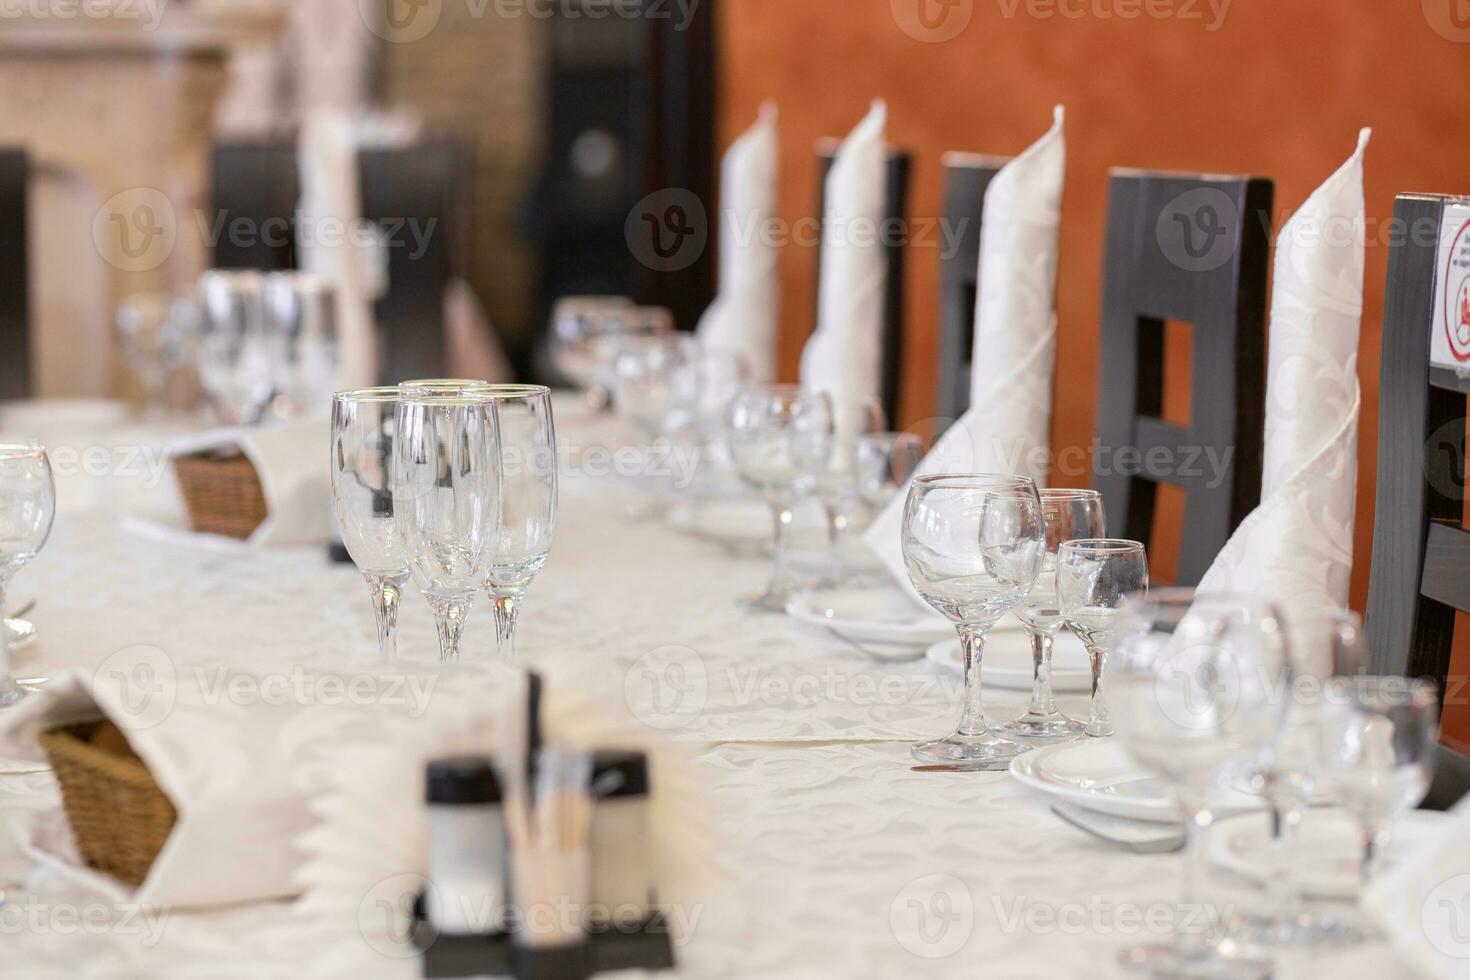 Served festive table with dishes, glasses, glasses, cutlery and napkins for a banquet photo